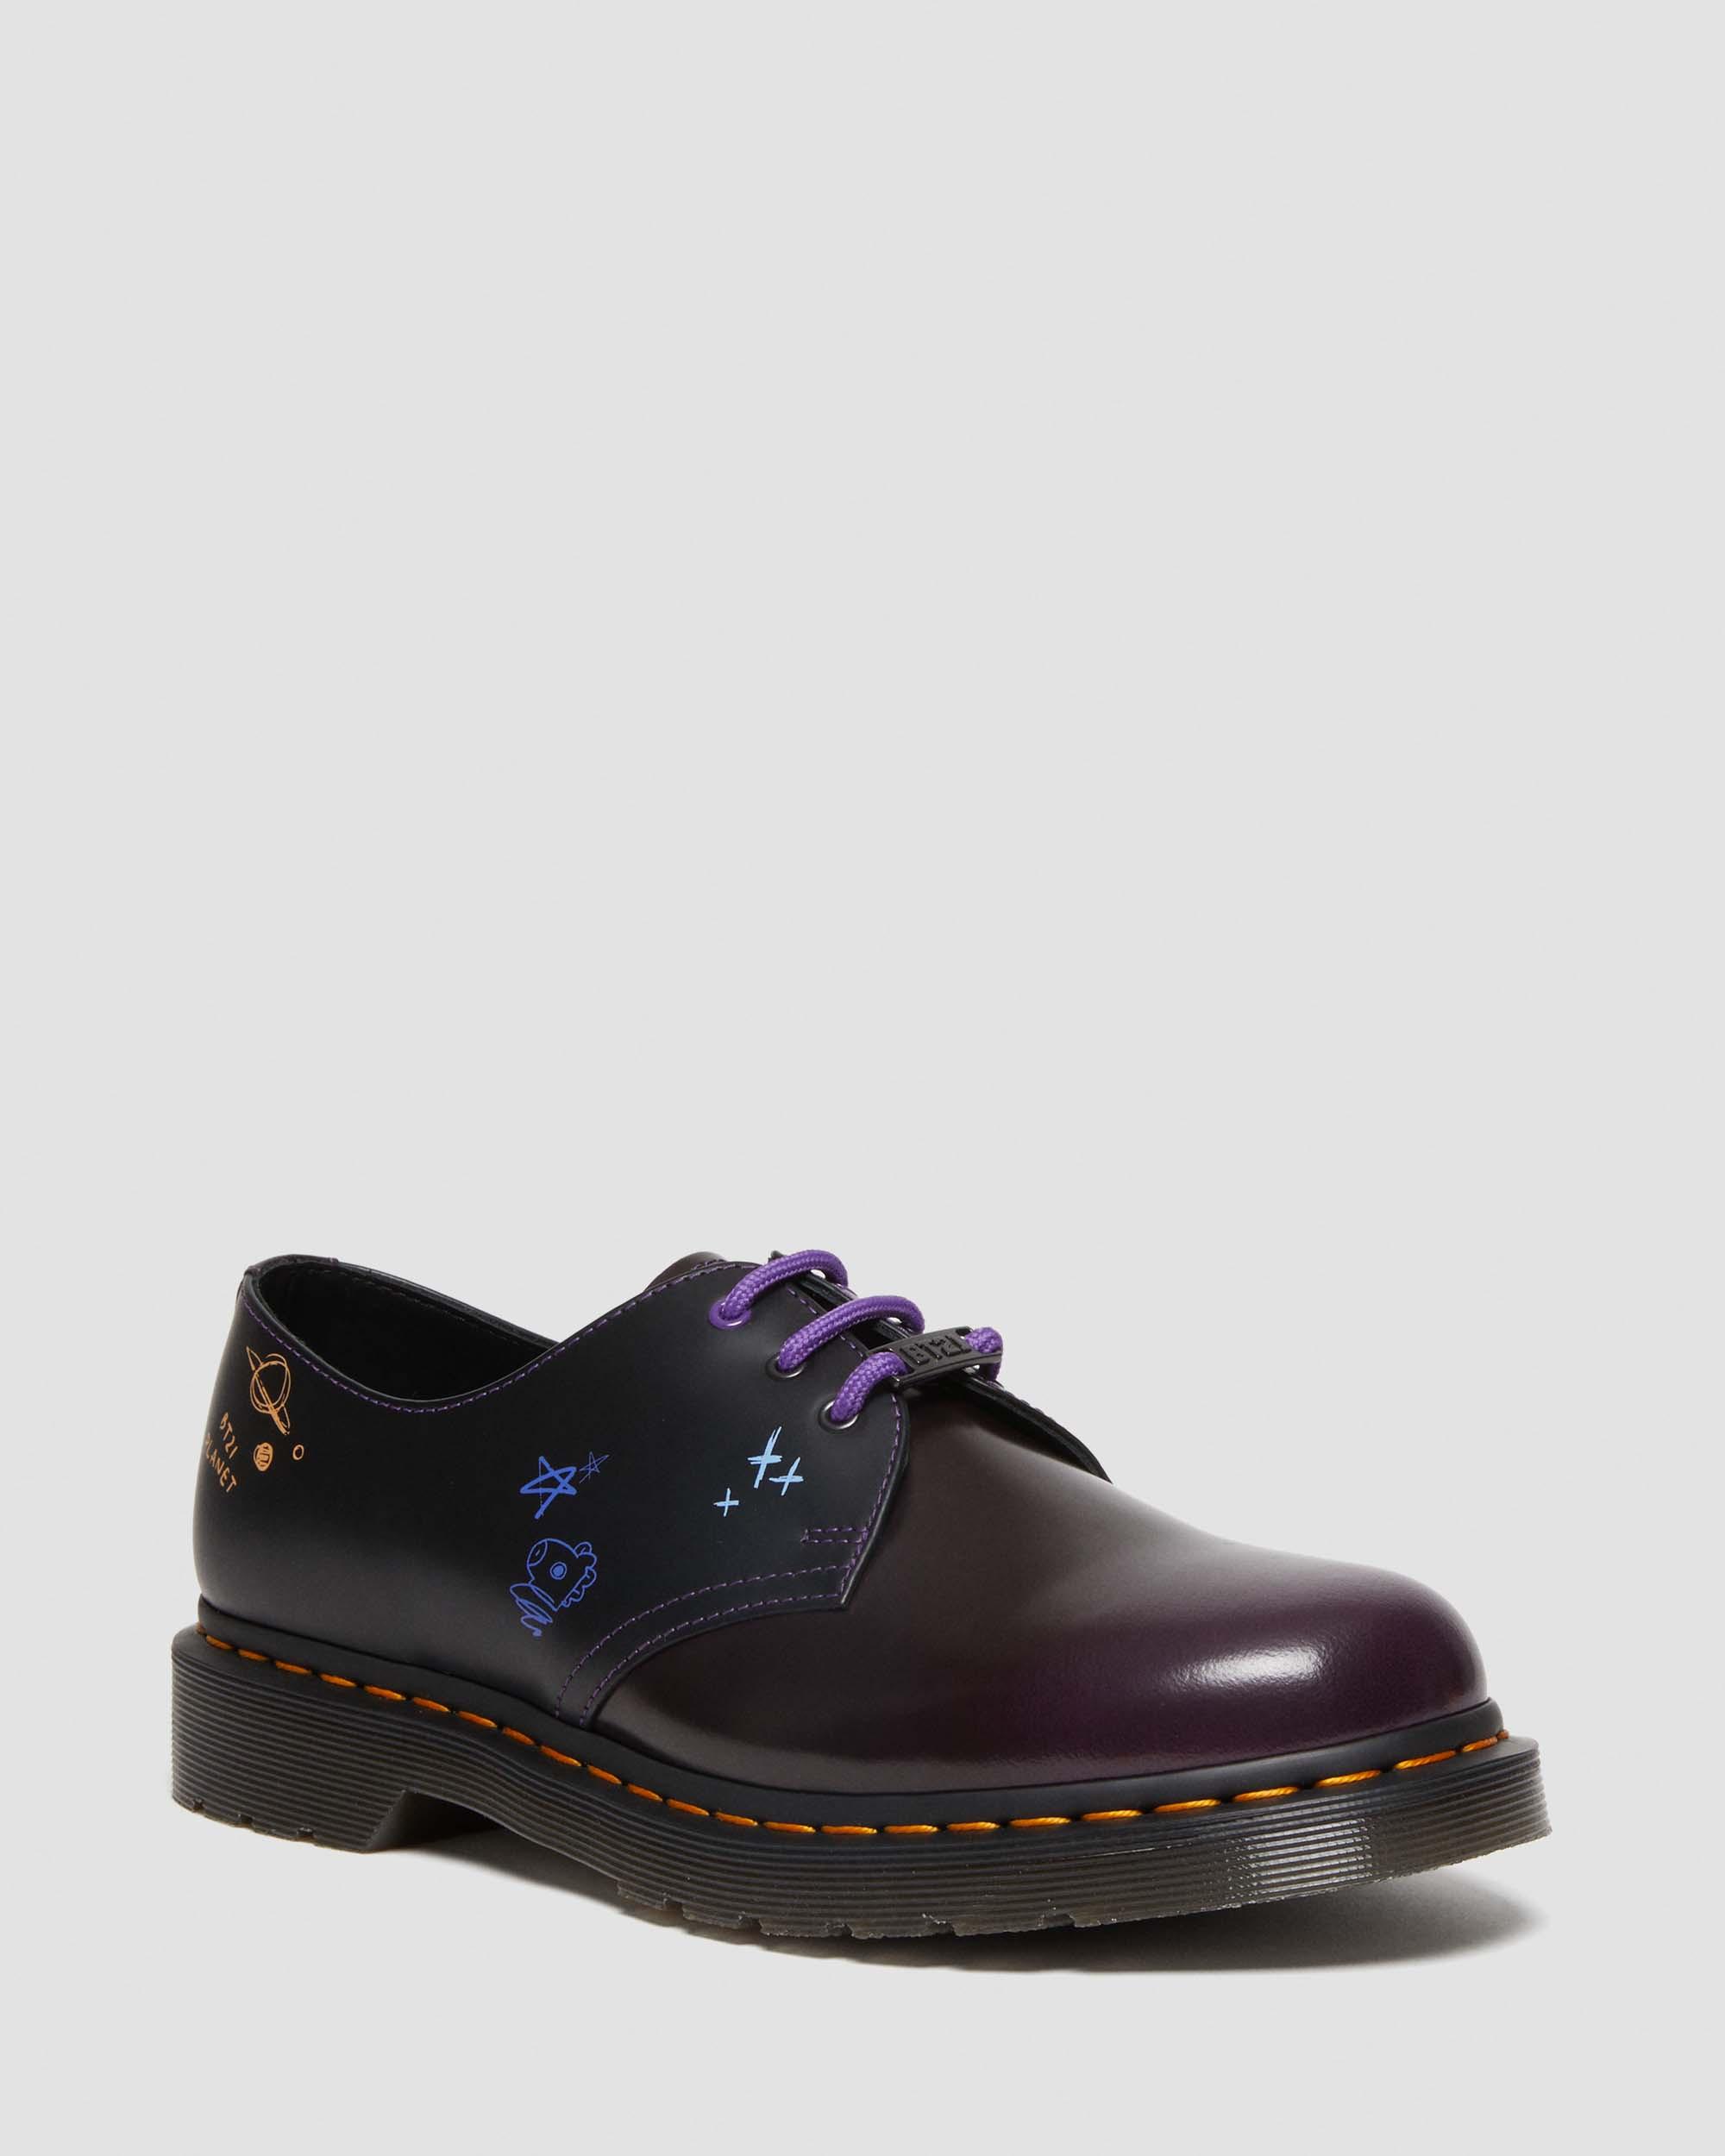 1461 BT21 Leather Oxford Shoes in Purple | Dr. Martens